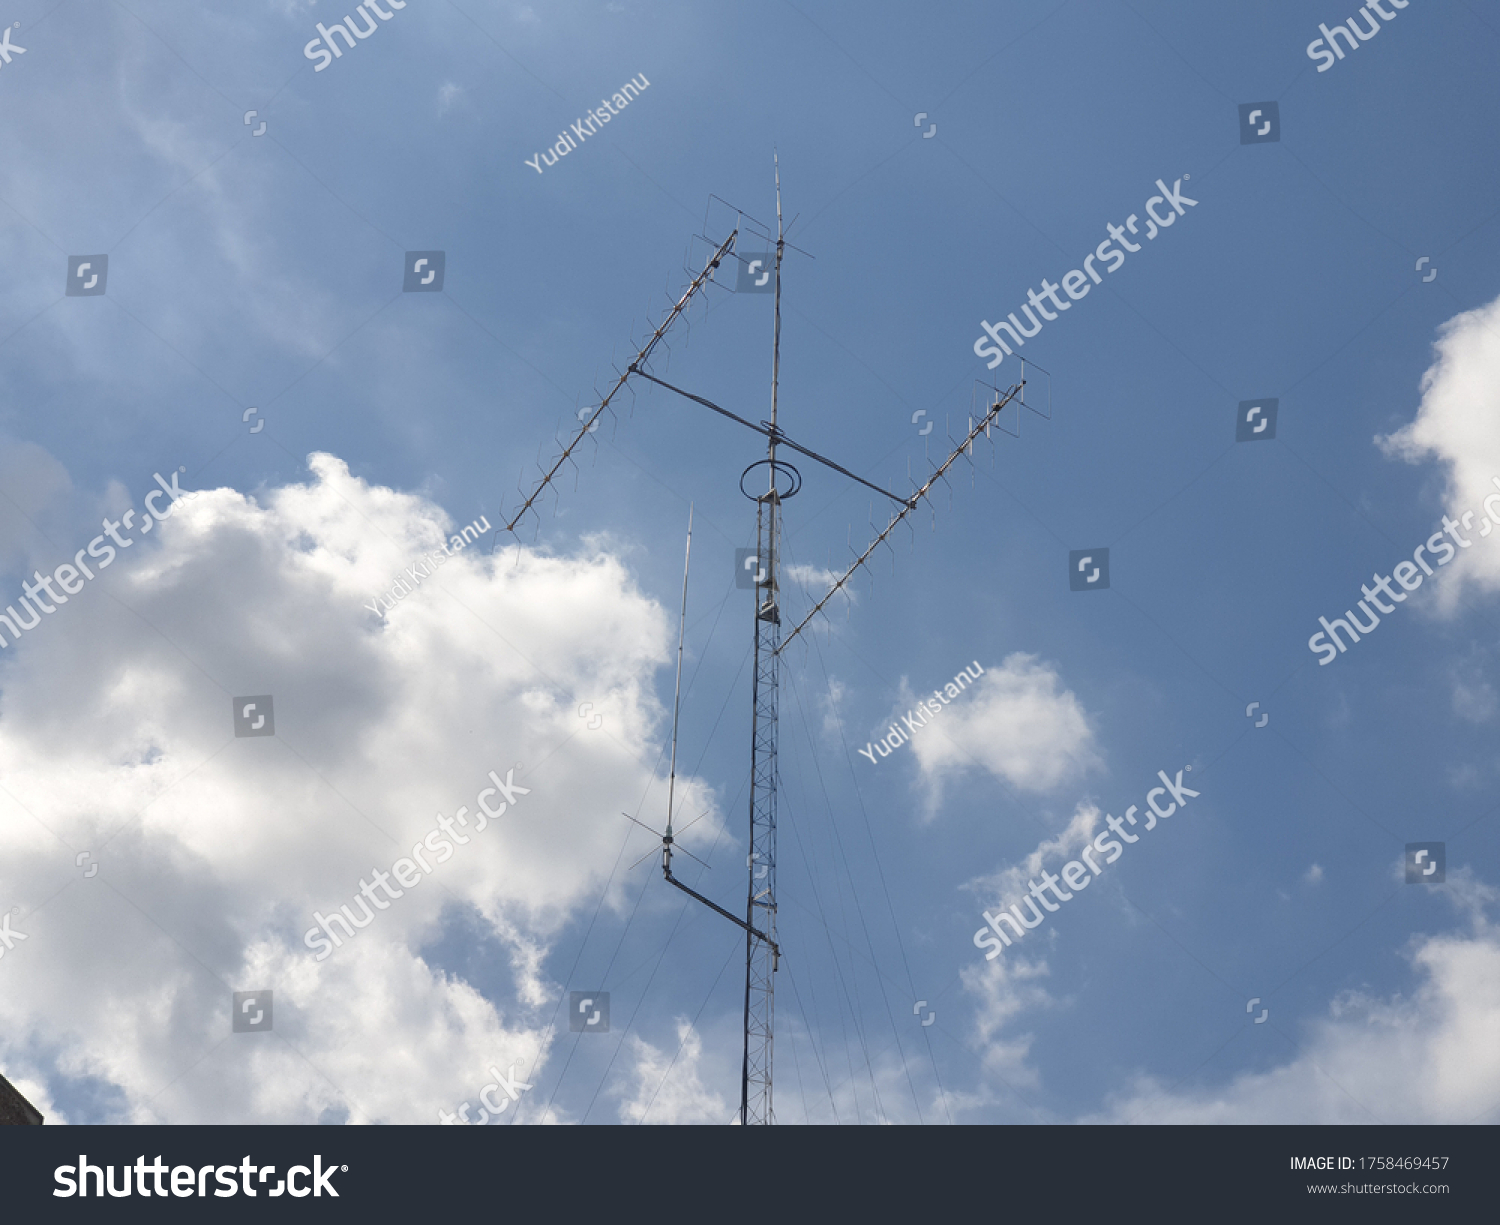 Amateur radio antenna with blue sky background #1758469457